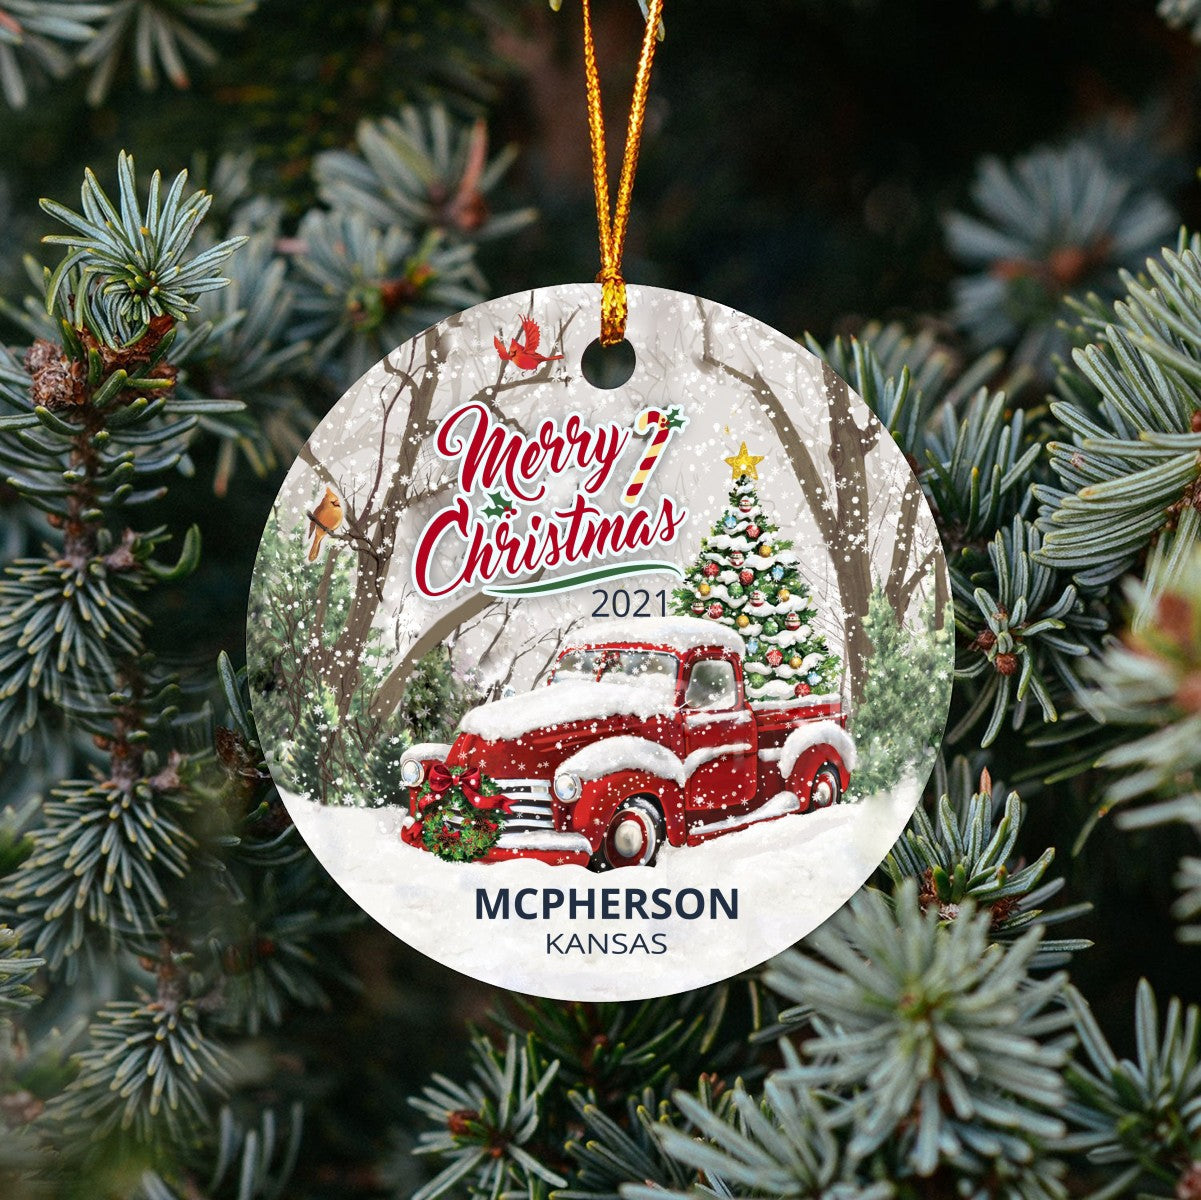 Christmas Tree Ornaments McPherson - Ornament With Name City, State McPherson Kansas KS Ornament - Red Truck Xmas Ornaments 3'' Plastic Gift For Family, Friend And Housewarming